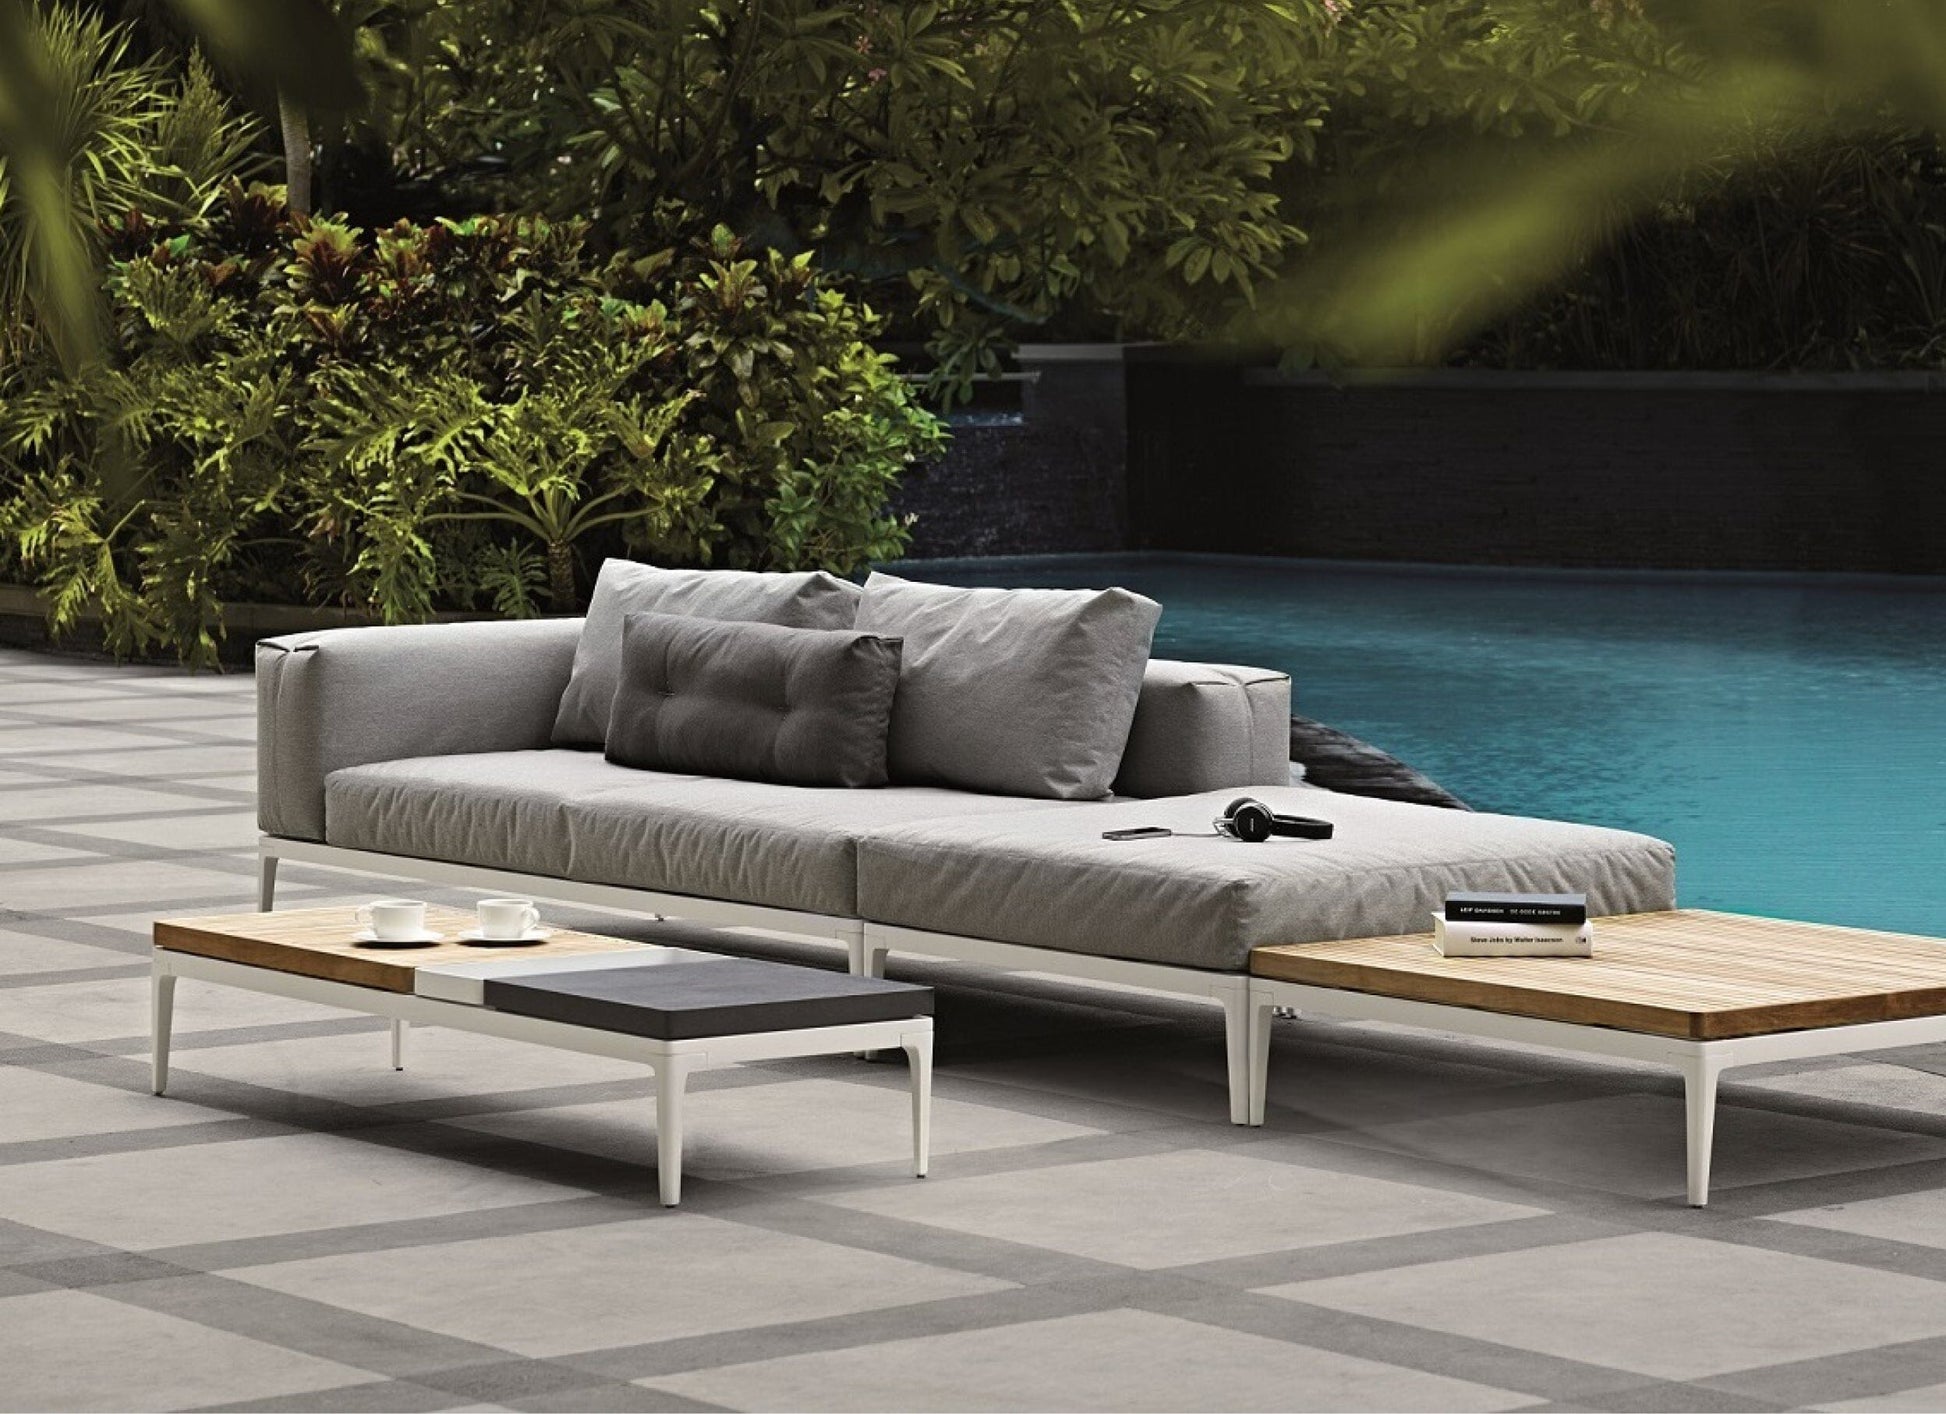 Grid Sofa in White/Seagull Outdoor Furniture Gloster 